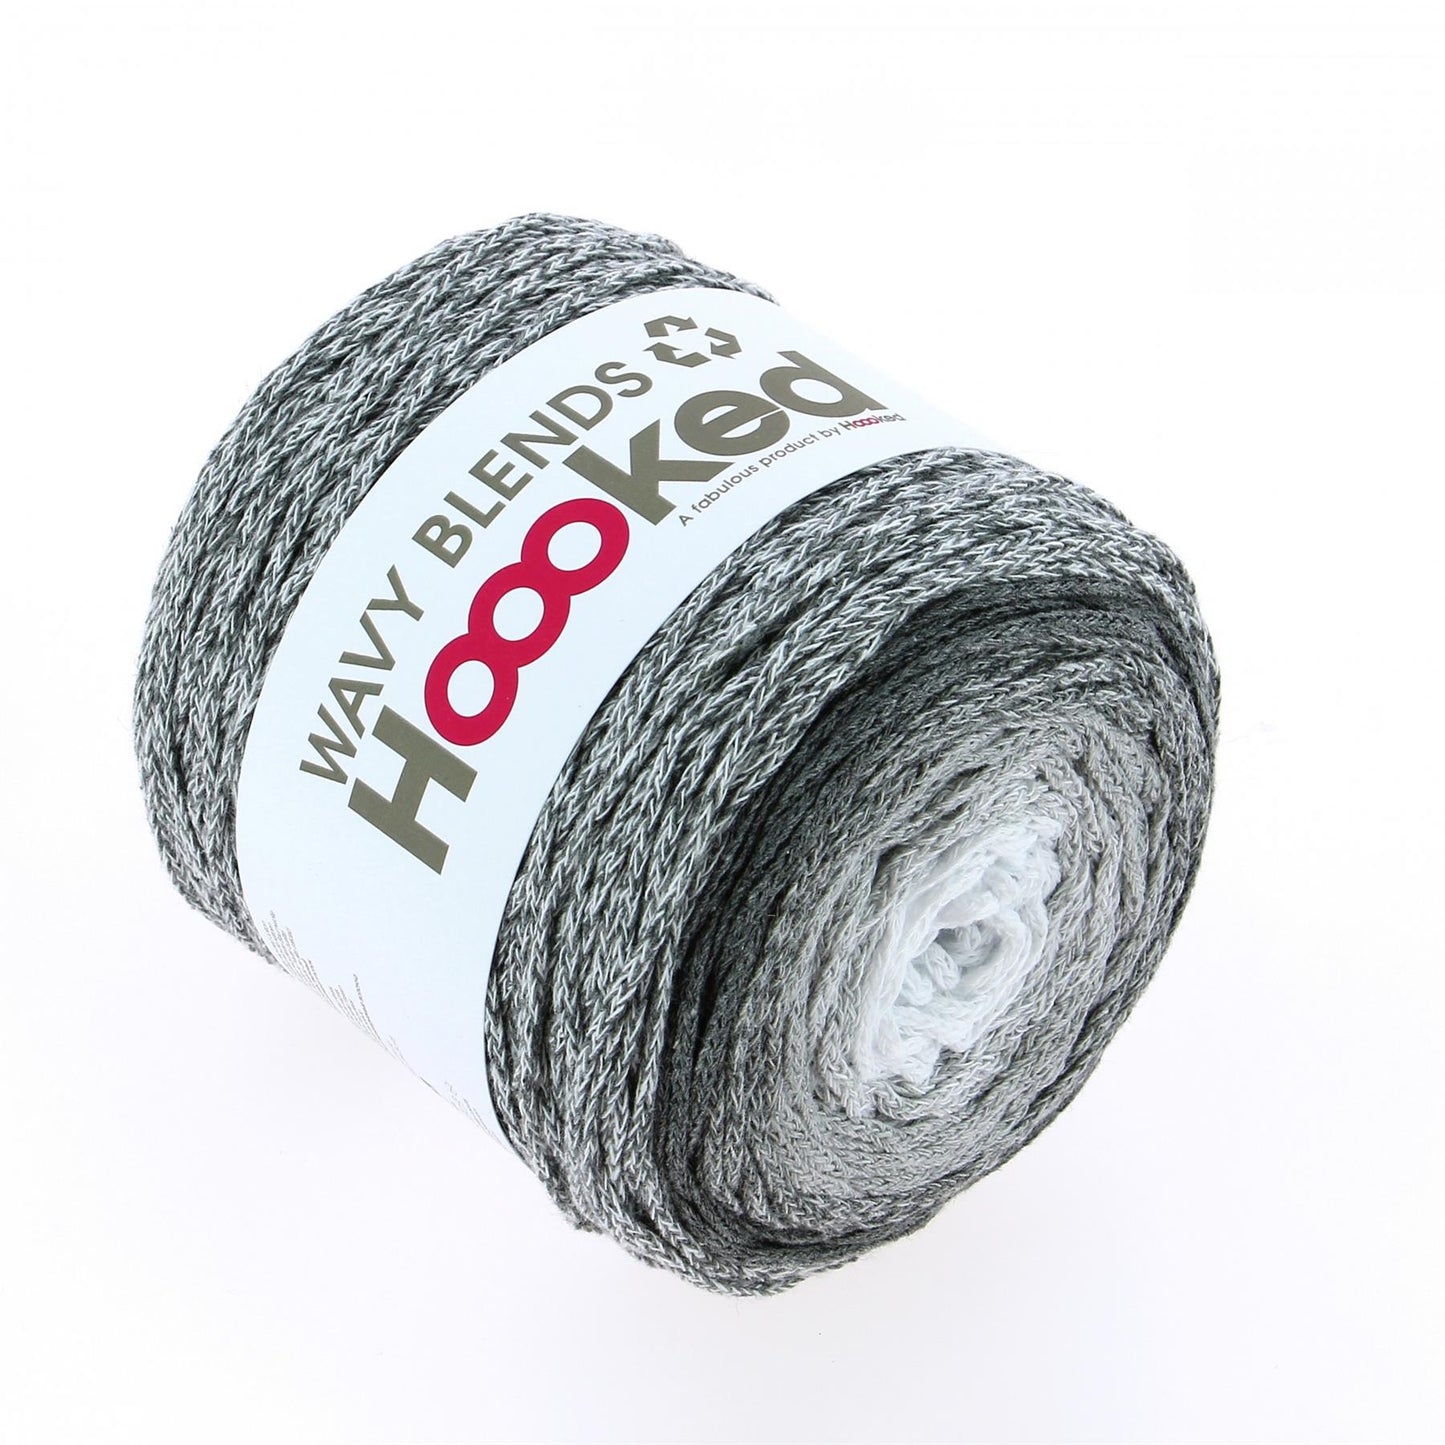 [Hoooked] WB07 Wavy Blends Silver White Recycled Cotton Yarn - 260M, 250g